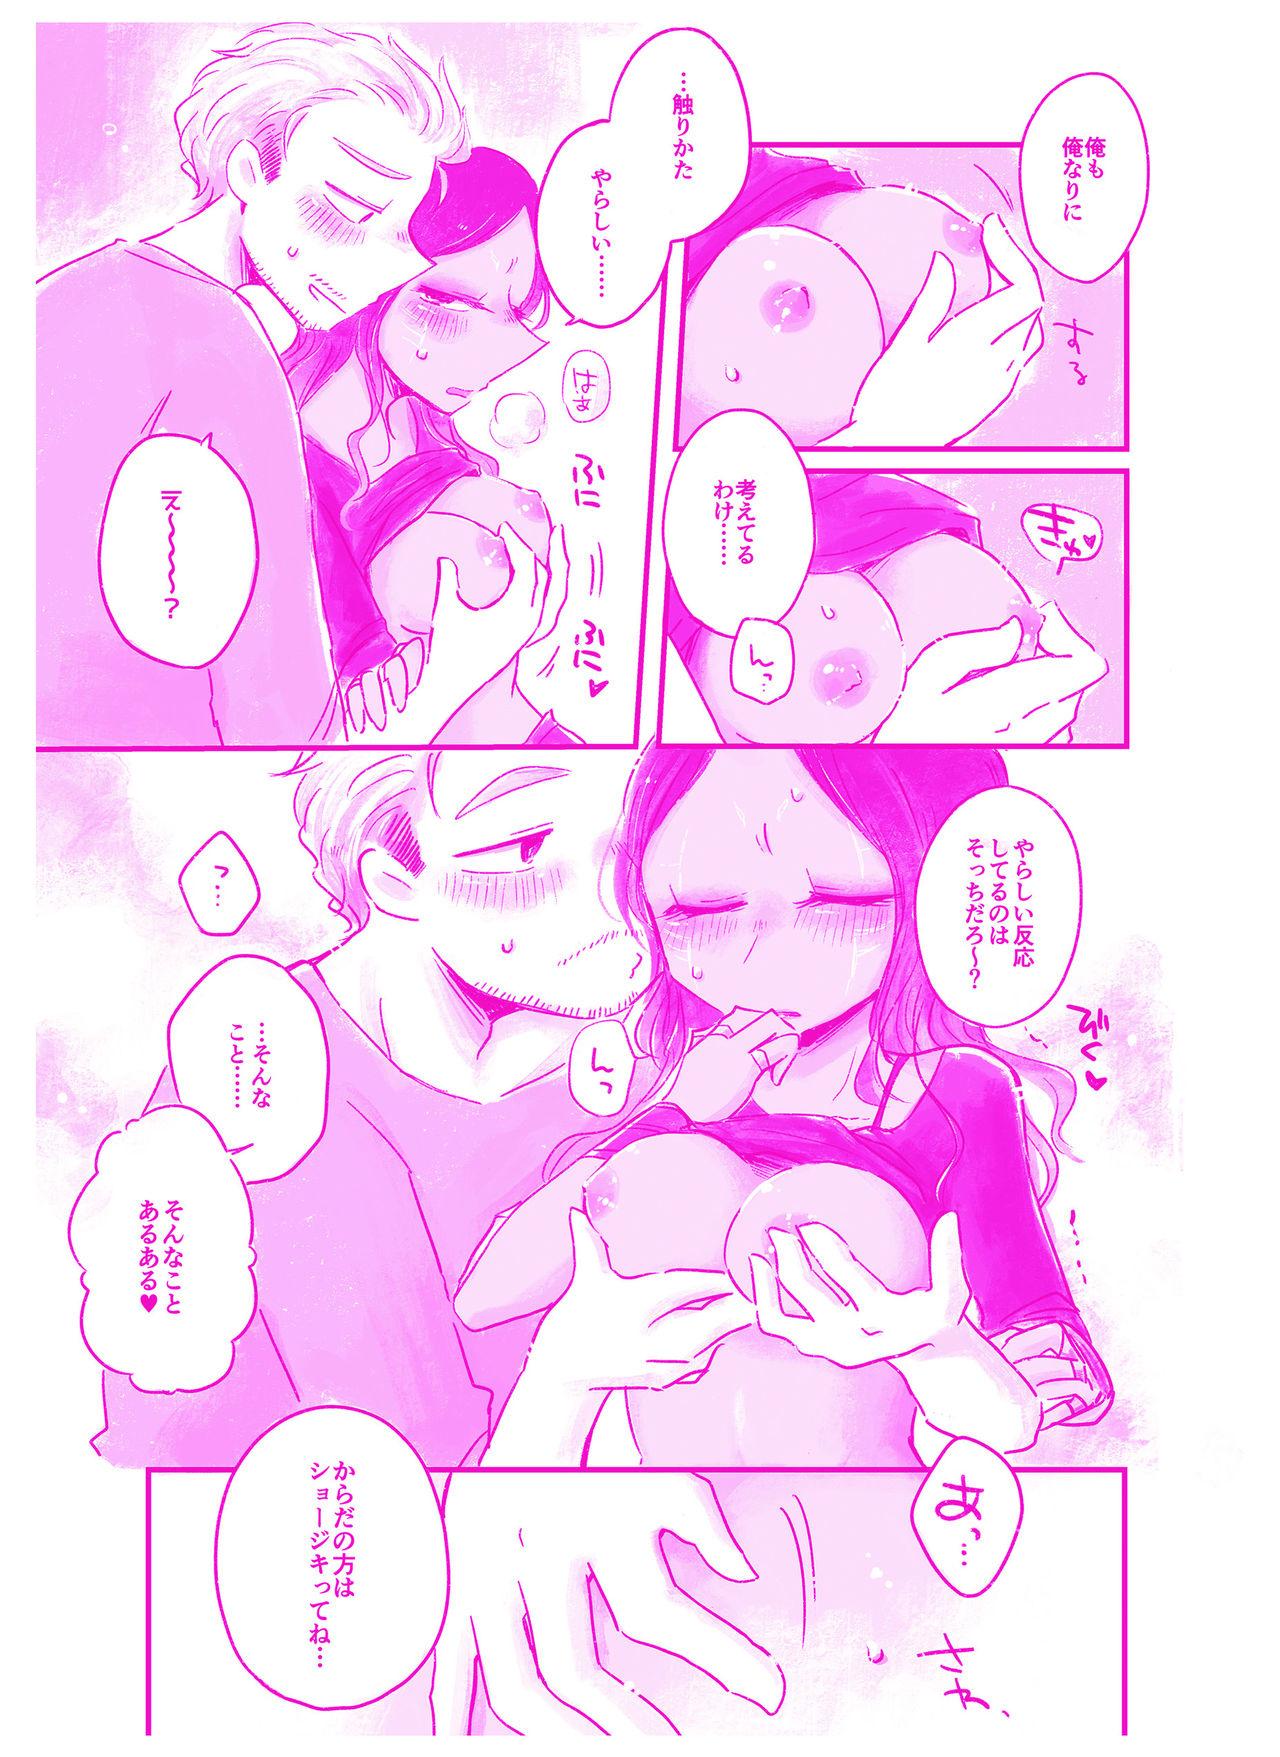 Glamcore 言われてみてえもんだ - Guardians of the galaxy Bbc - Page 6